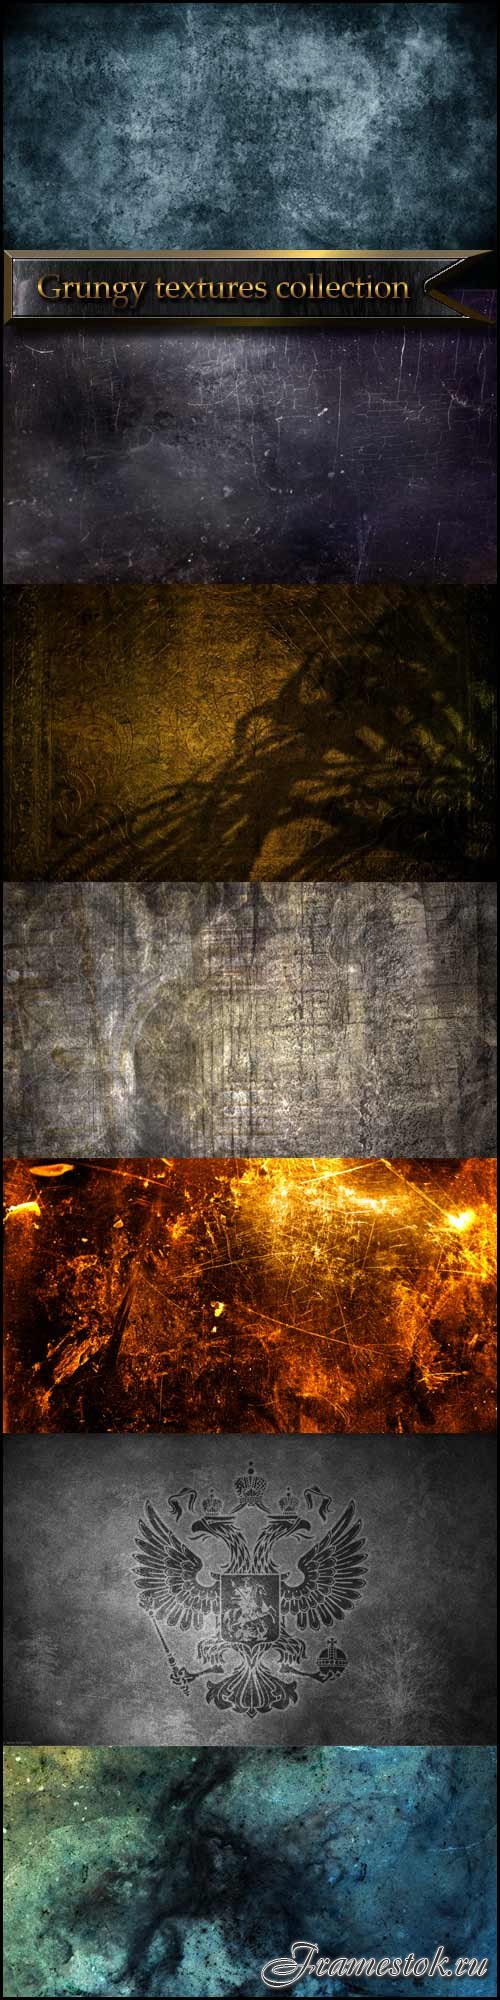 Grungy textures collection